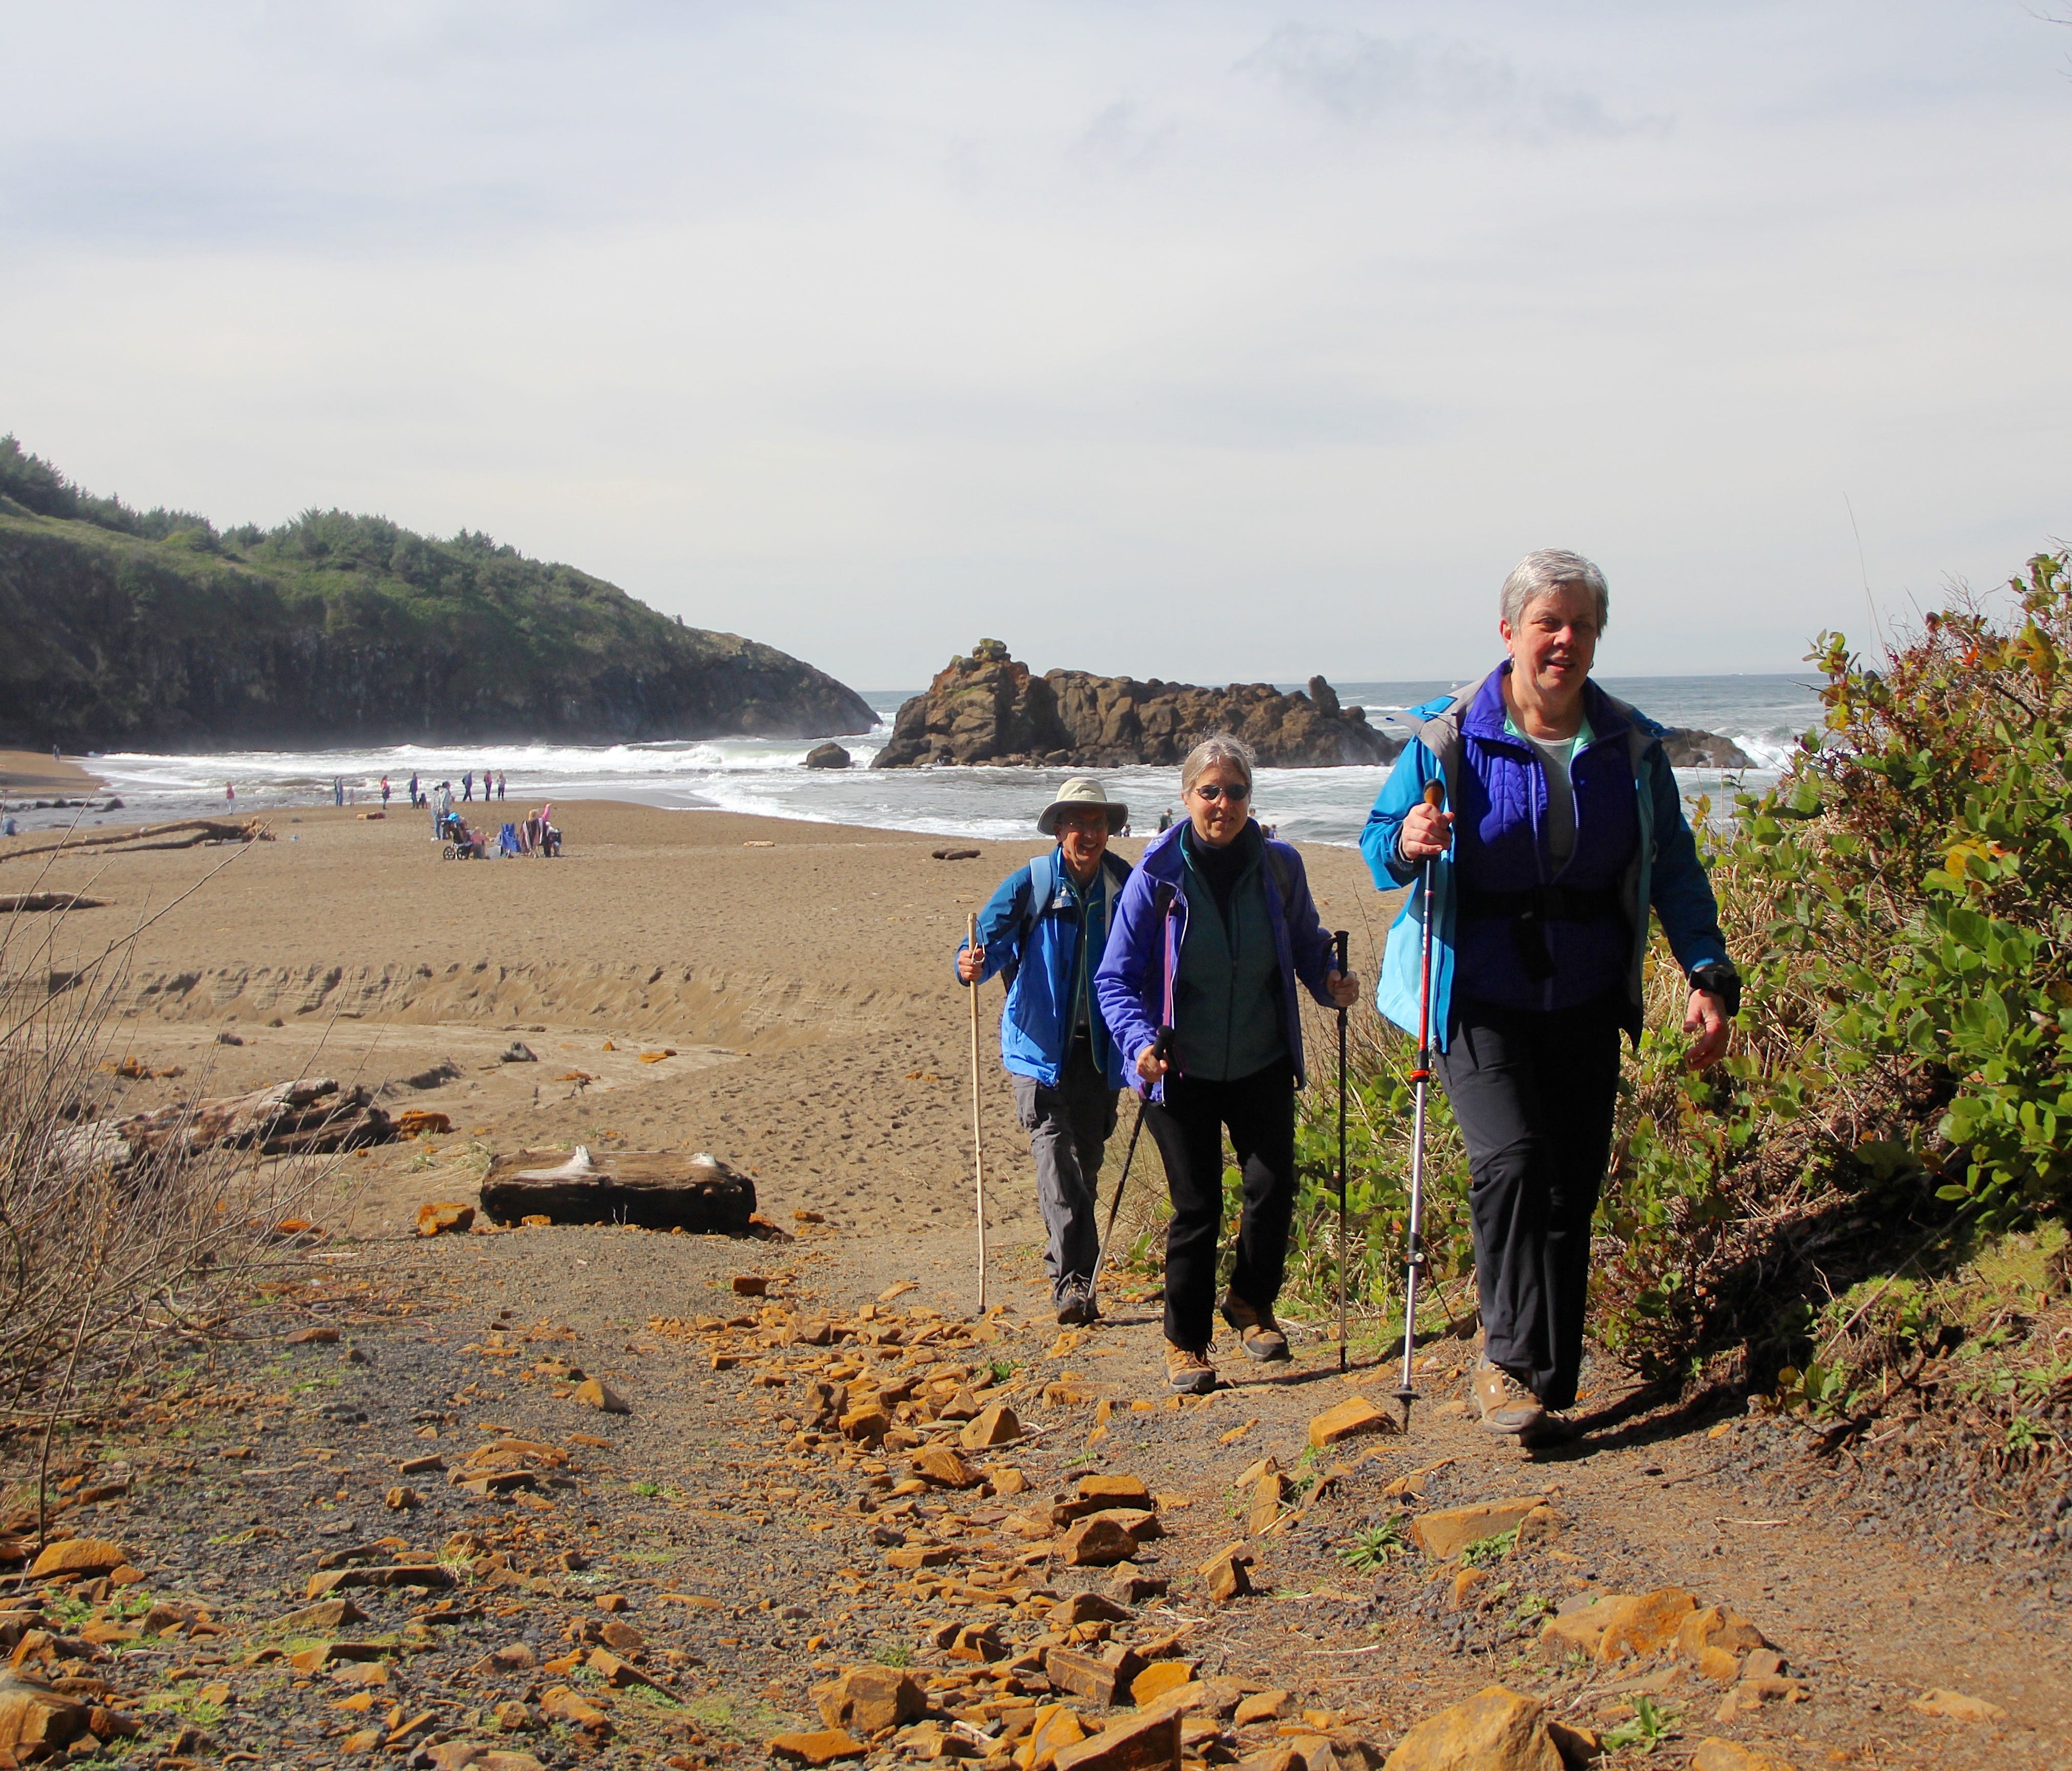 Connie Soper, front, and Dan and Lucy Hilburn are advocates for connecting the Oregon Coast Trail.